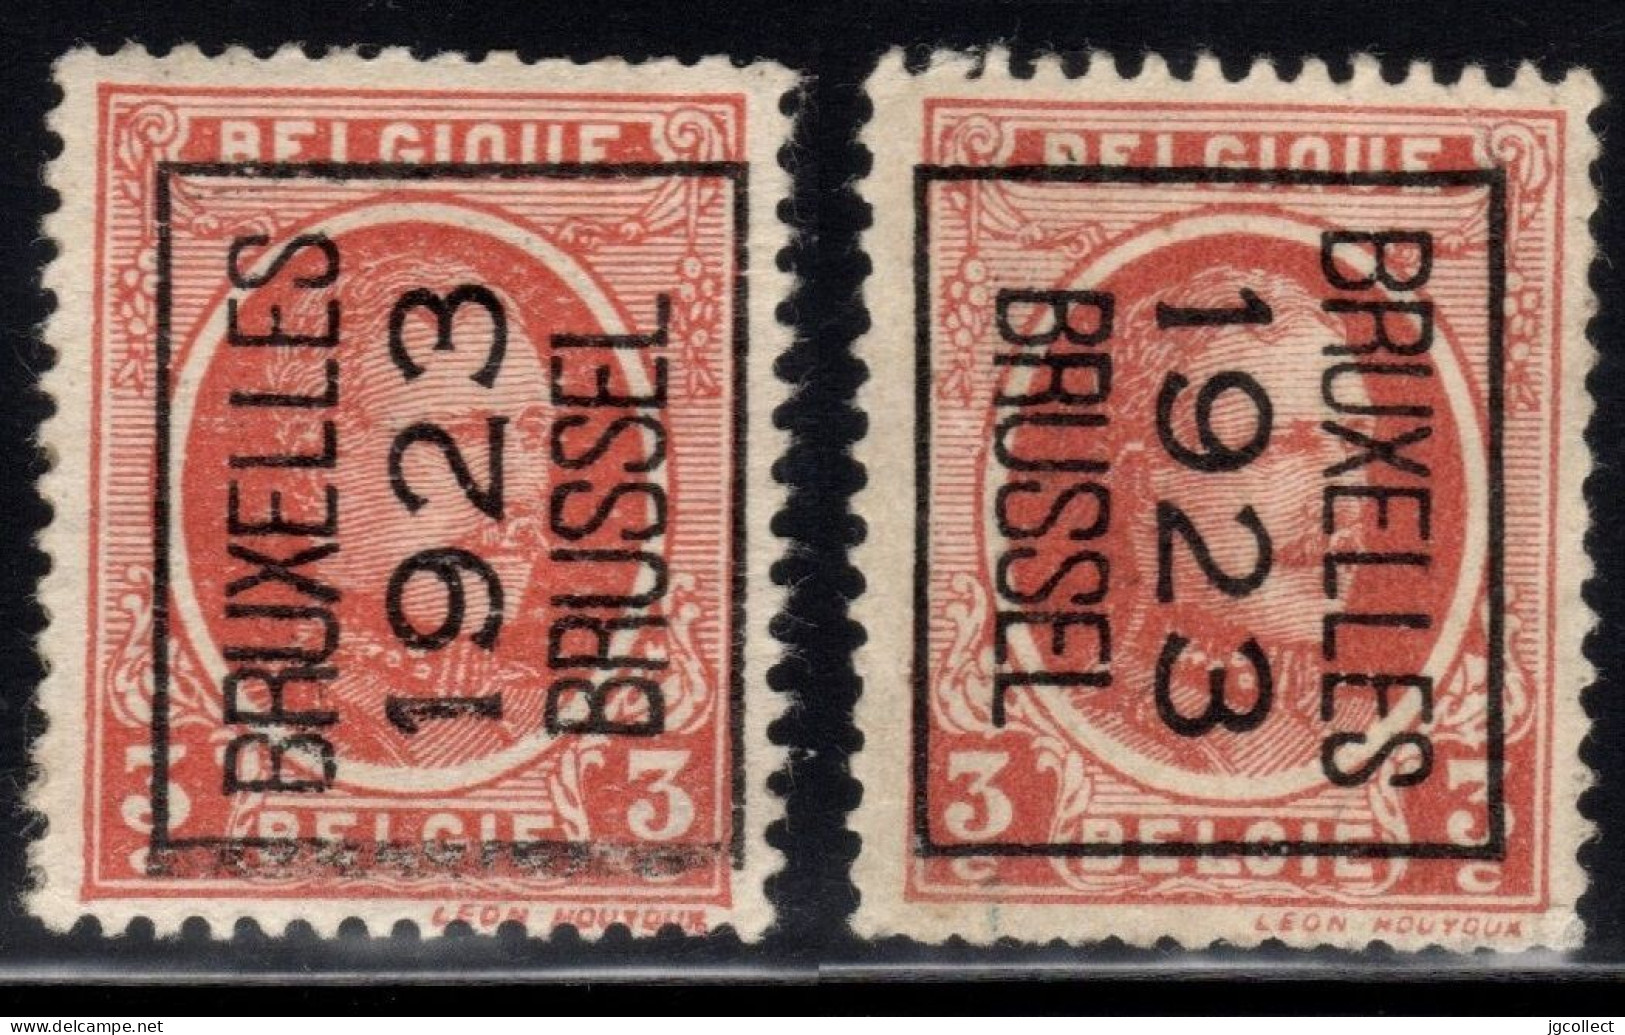 Typo 78 A+B (BRUXELLES 1923 BRUSSEL) - O/used - Tipo 1922-31 (Houyoux)